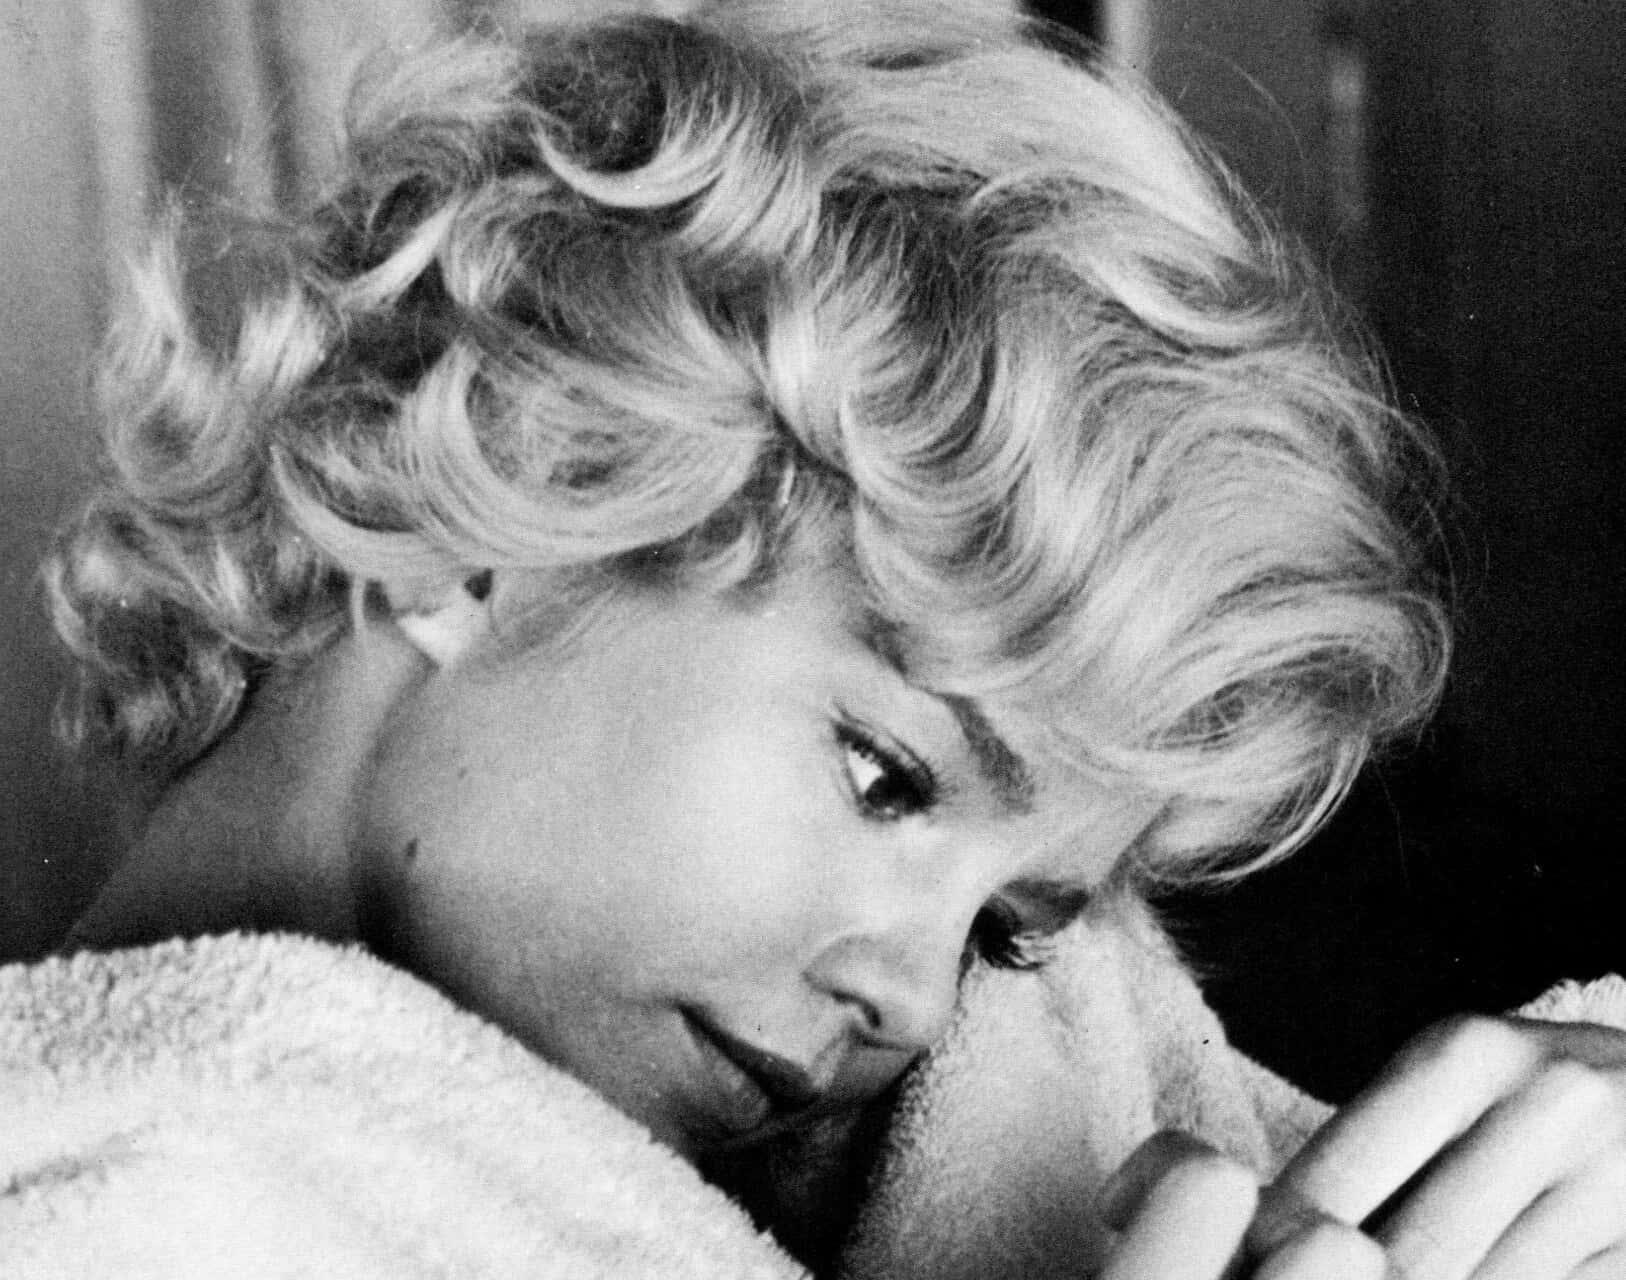 Tuesday Weld close up in the sand